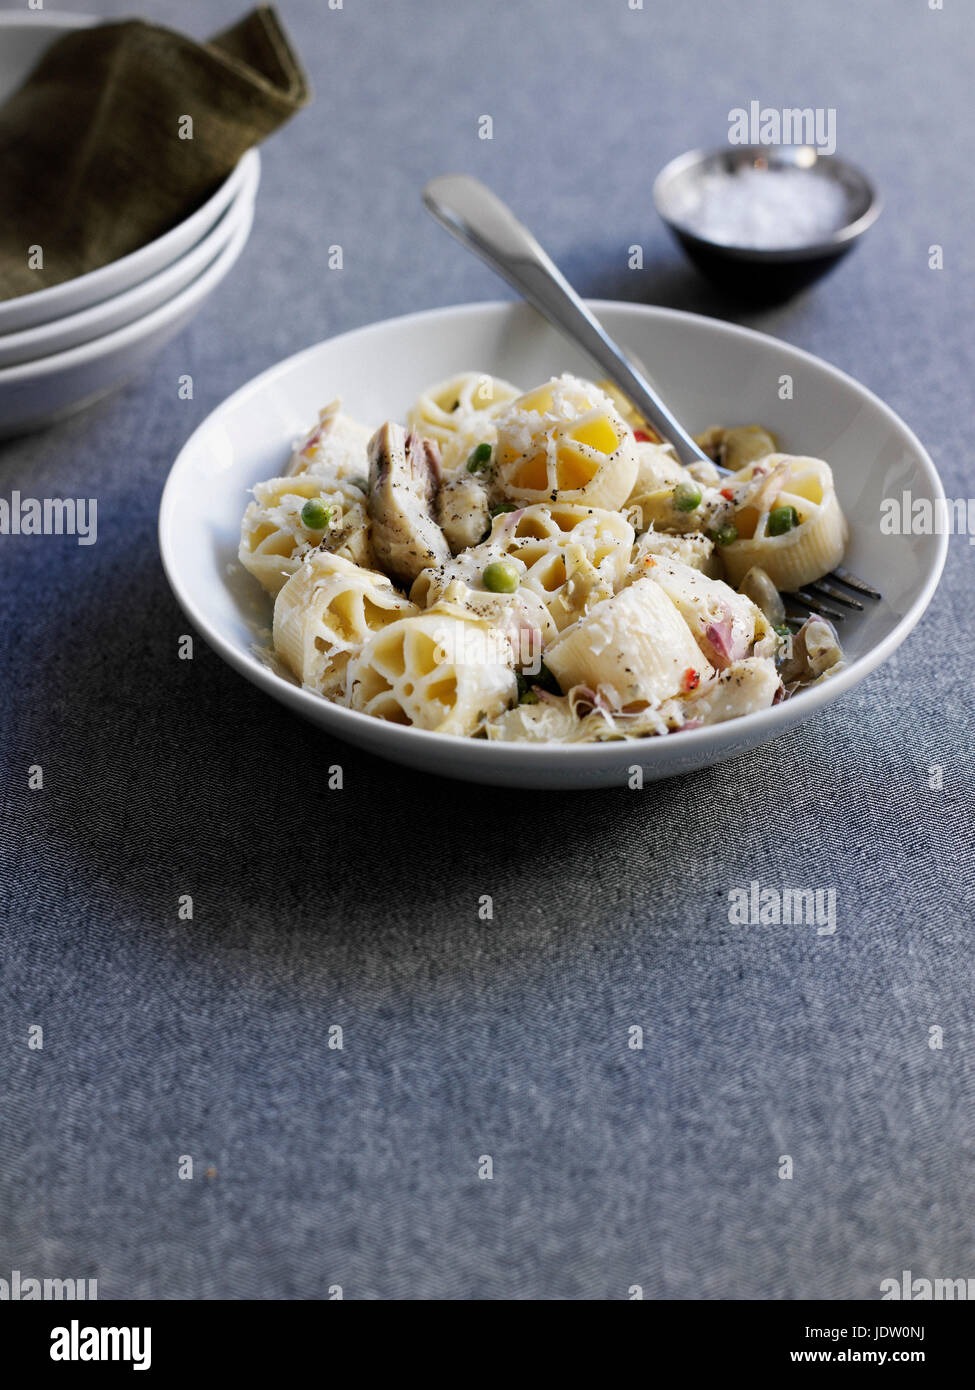 Pasta with chicken and cheese Stock Photo